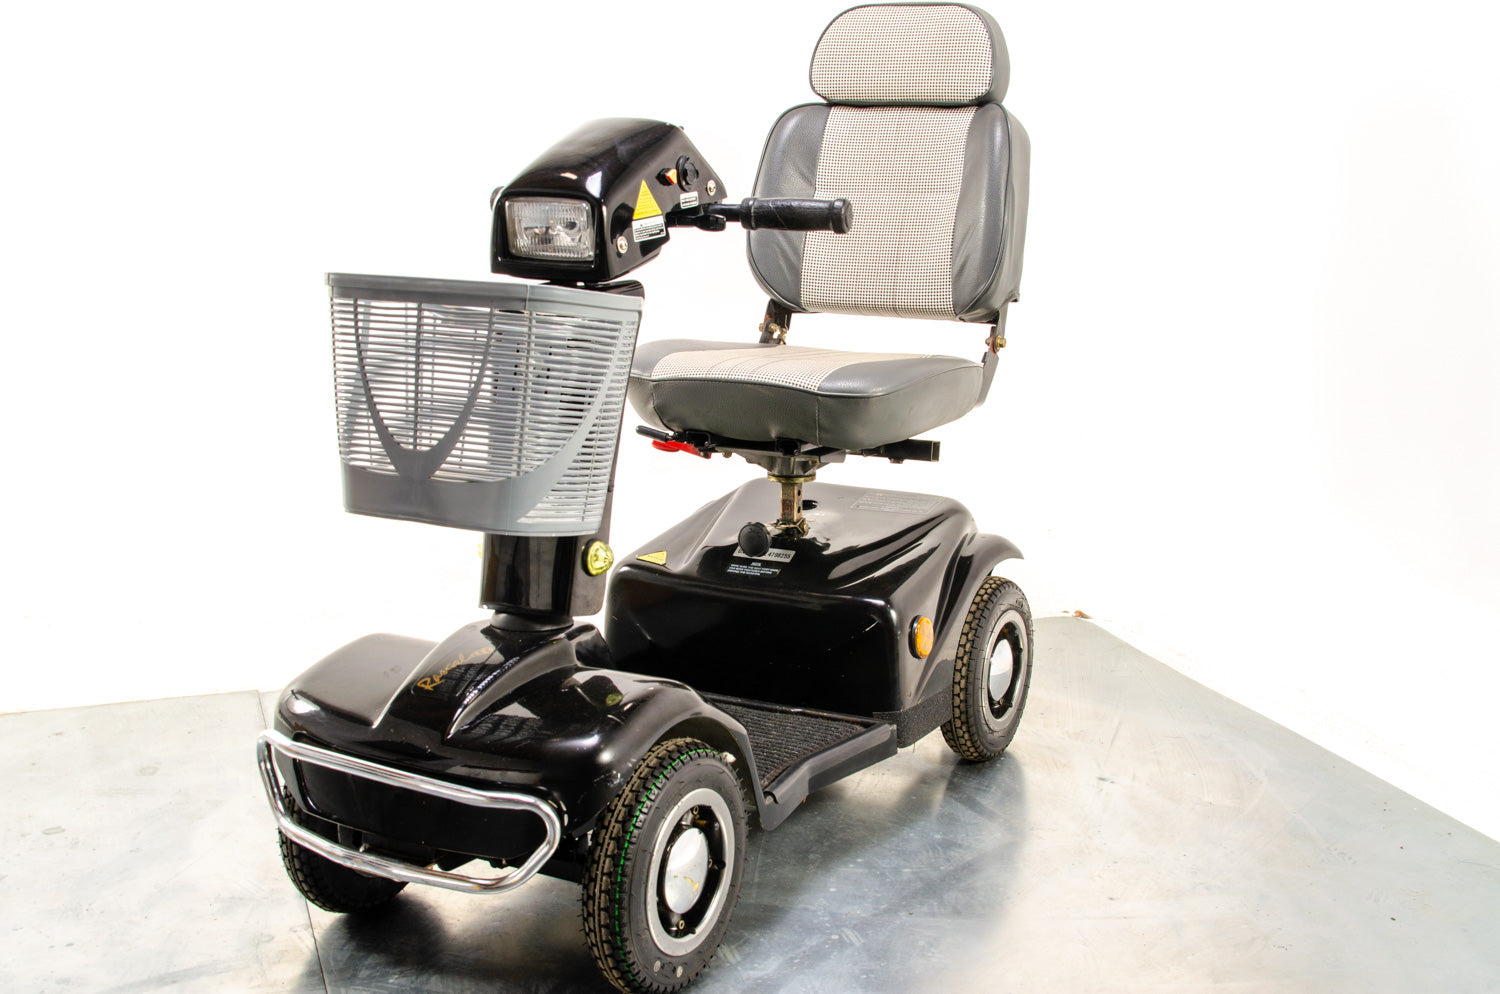 Rascal 388XL All-Terrain Used Electric Mobility Scooter 6mph Road Pavement Suspension Black 13481